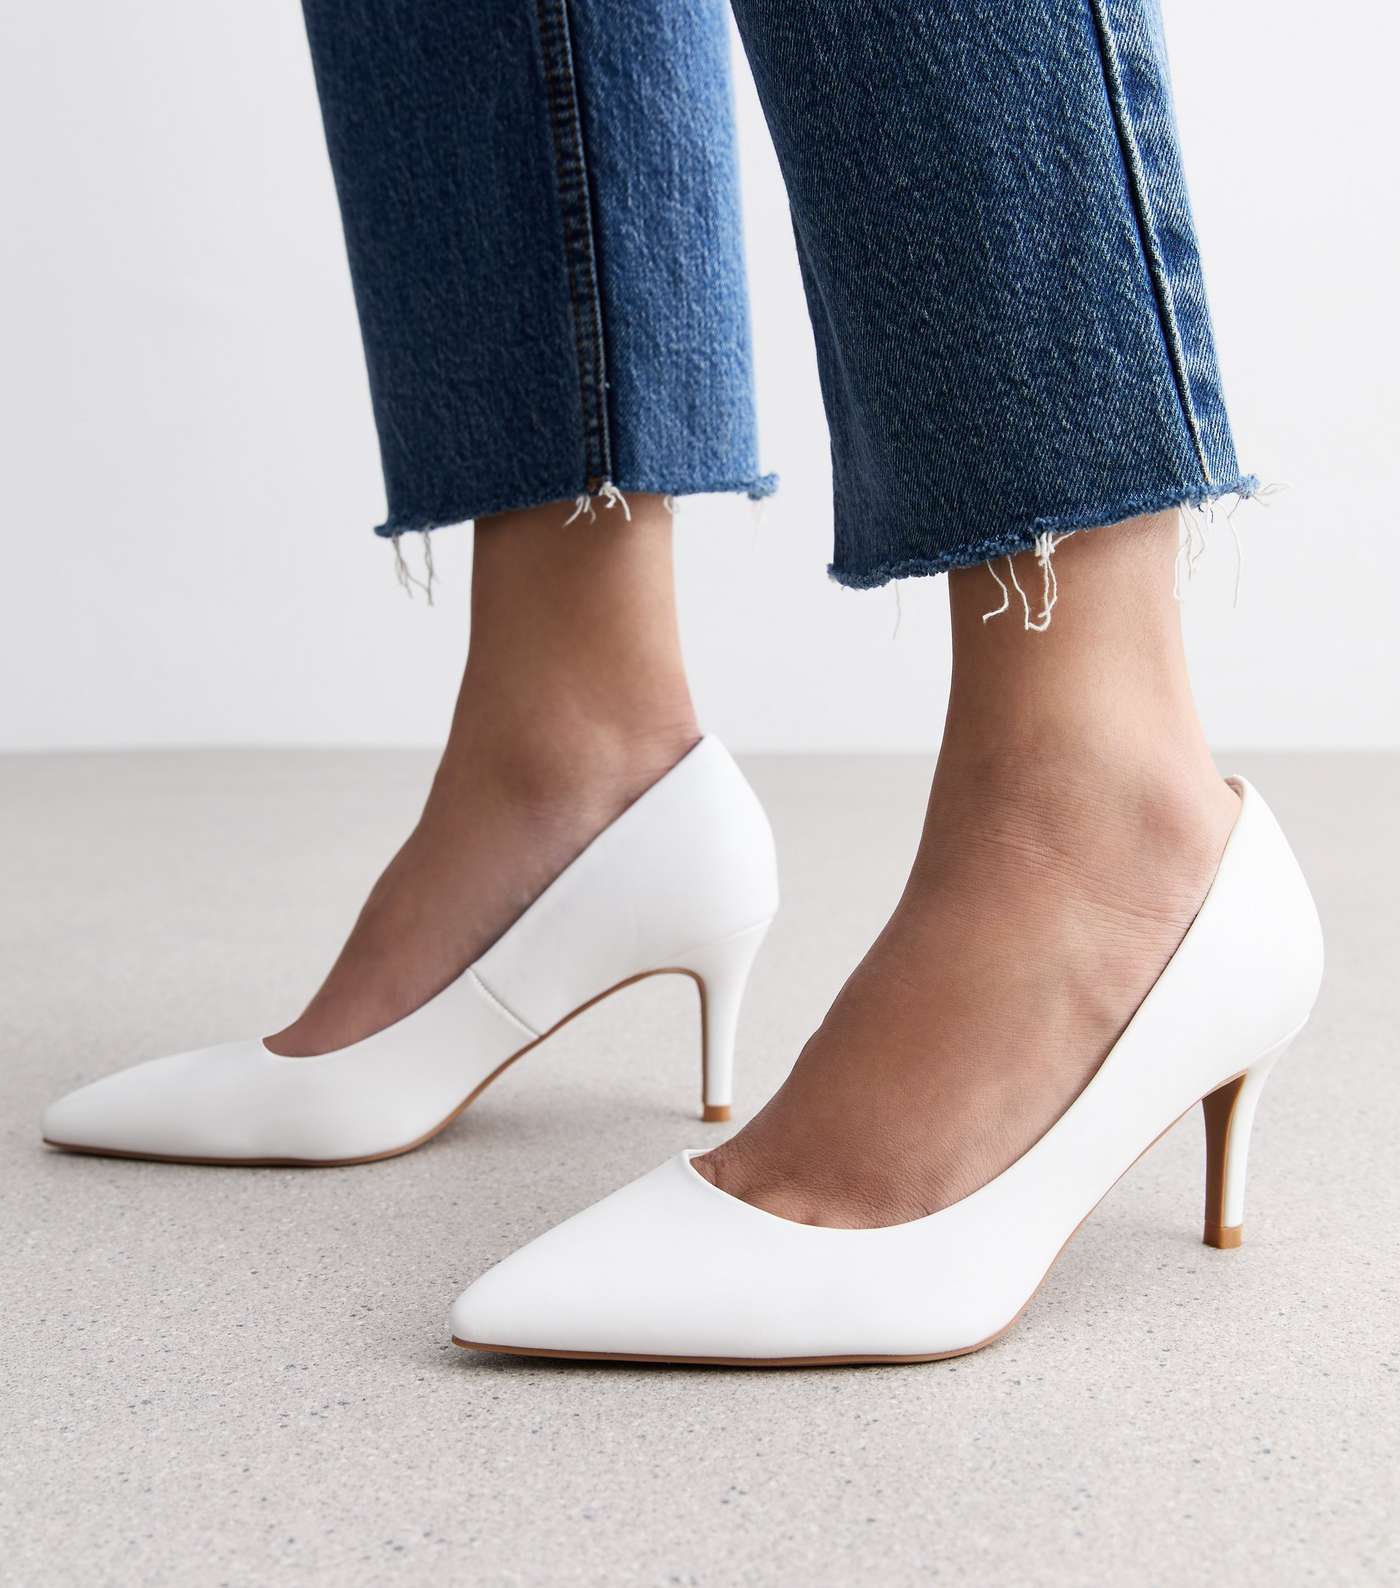 Wide Fit White Leather-Look Stiletto Heel Court Shoes Image 2